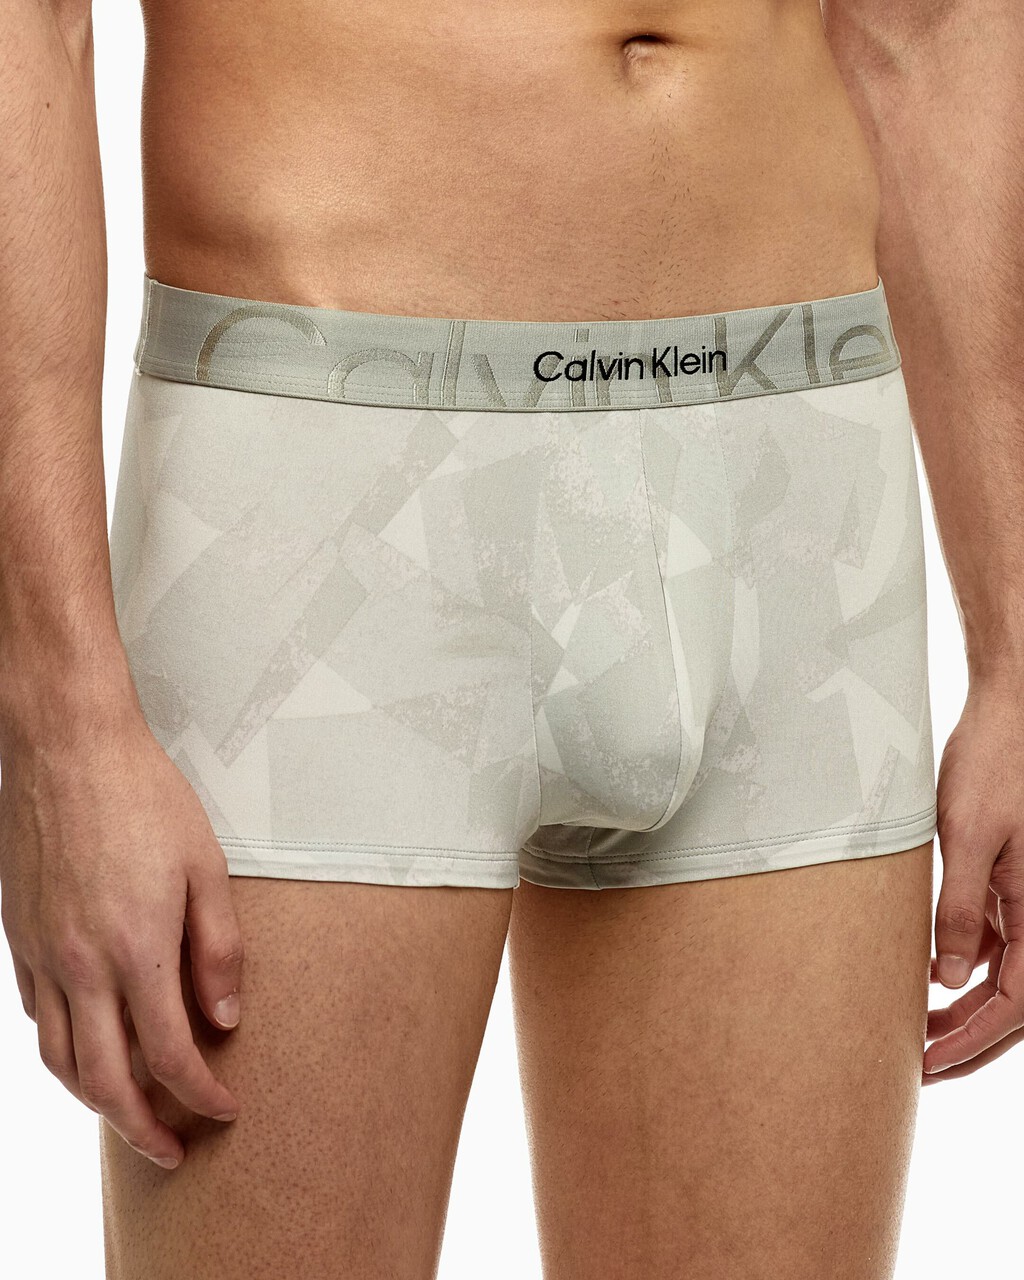 EMBOSSED ICON LOW RISE TRUNKS, Deco Squares Print_Rich Clay, hi-res